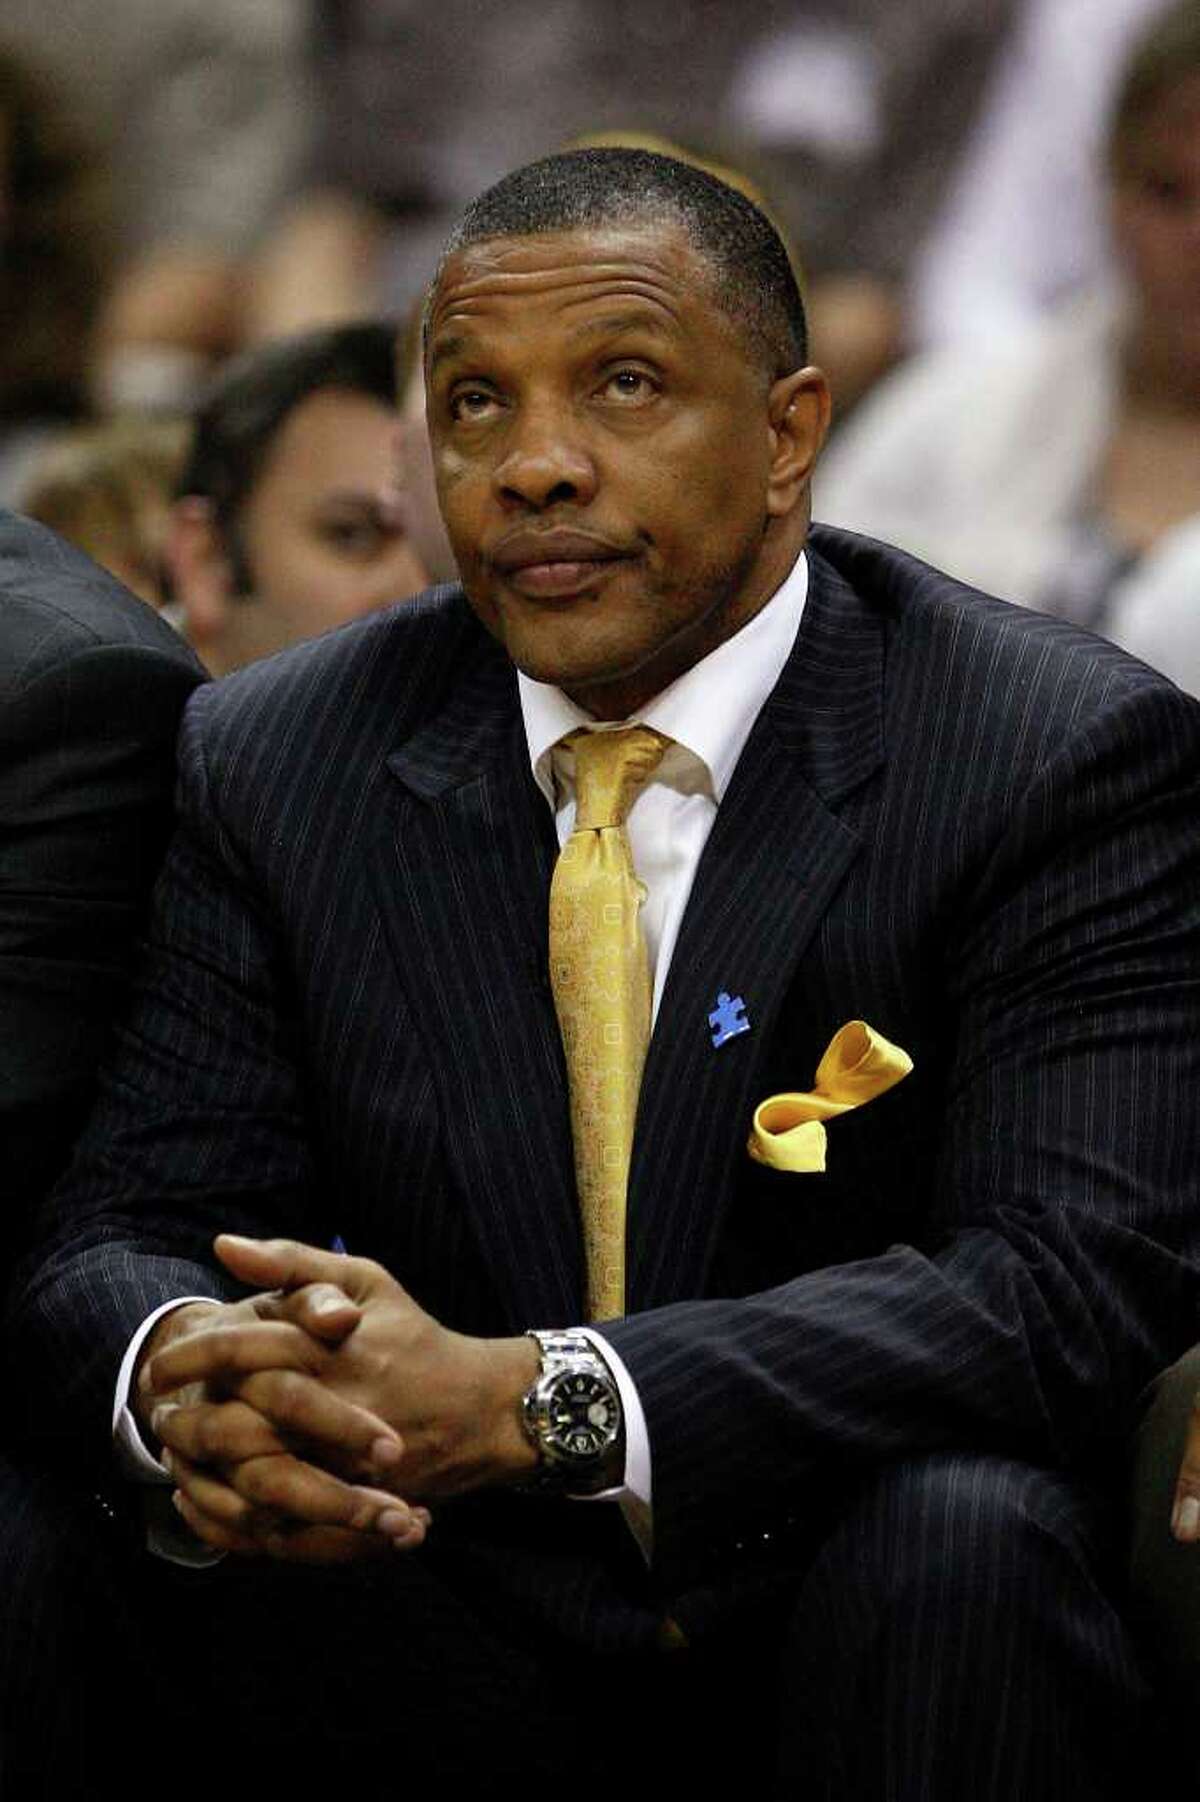 Suns coach Alvin Gentry looks up at the scoreboard late in the game as they go on to lose to the San Antonio Spurs, 114-97, at the AT&T Center, Sunday, April 3, 2011. JERRY LARA/glara@express-news.net